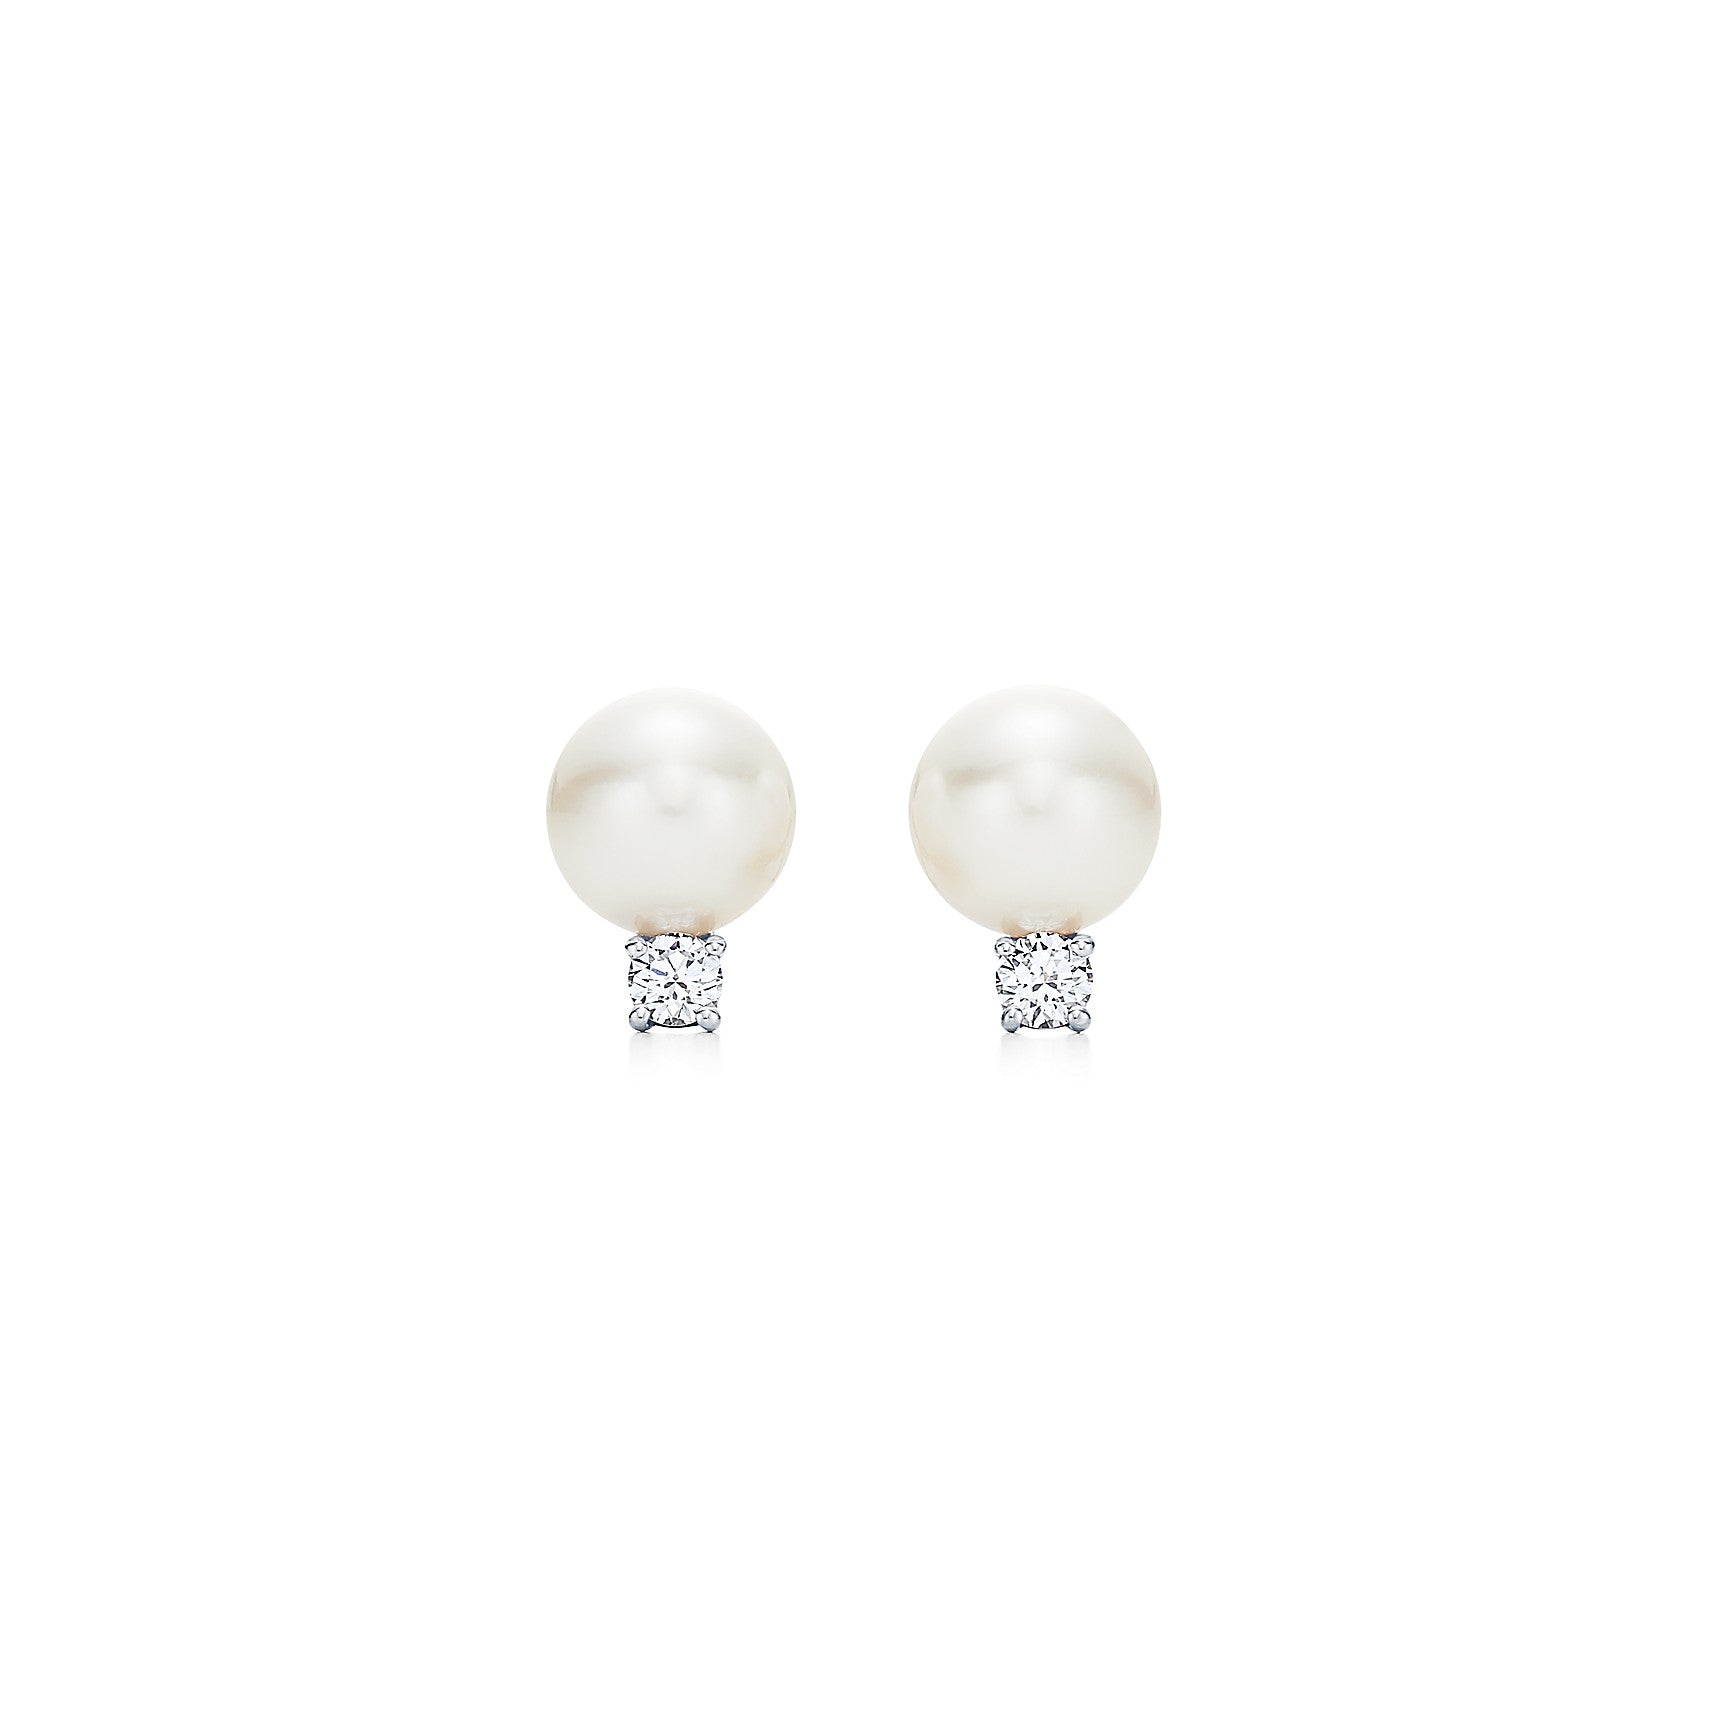 Tiffany Signature Pearls Stud Earrings in White Gold with Diamonds